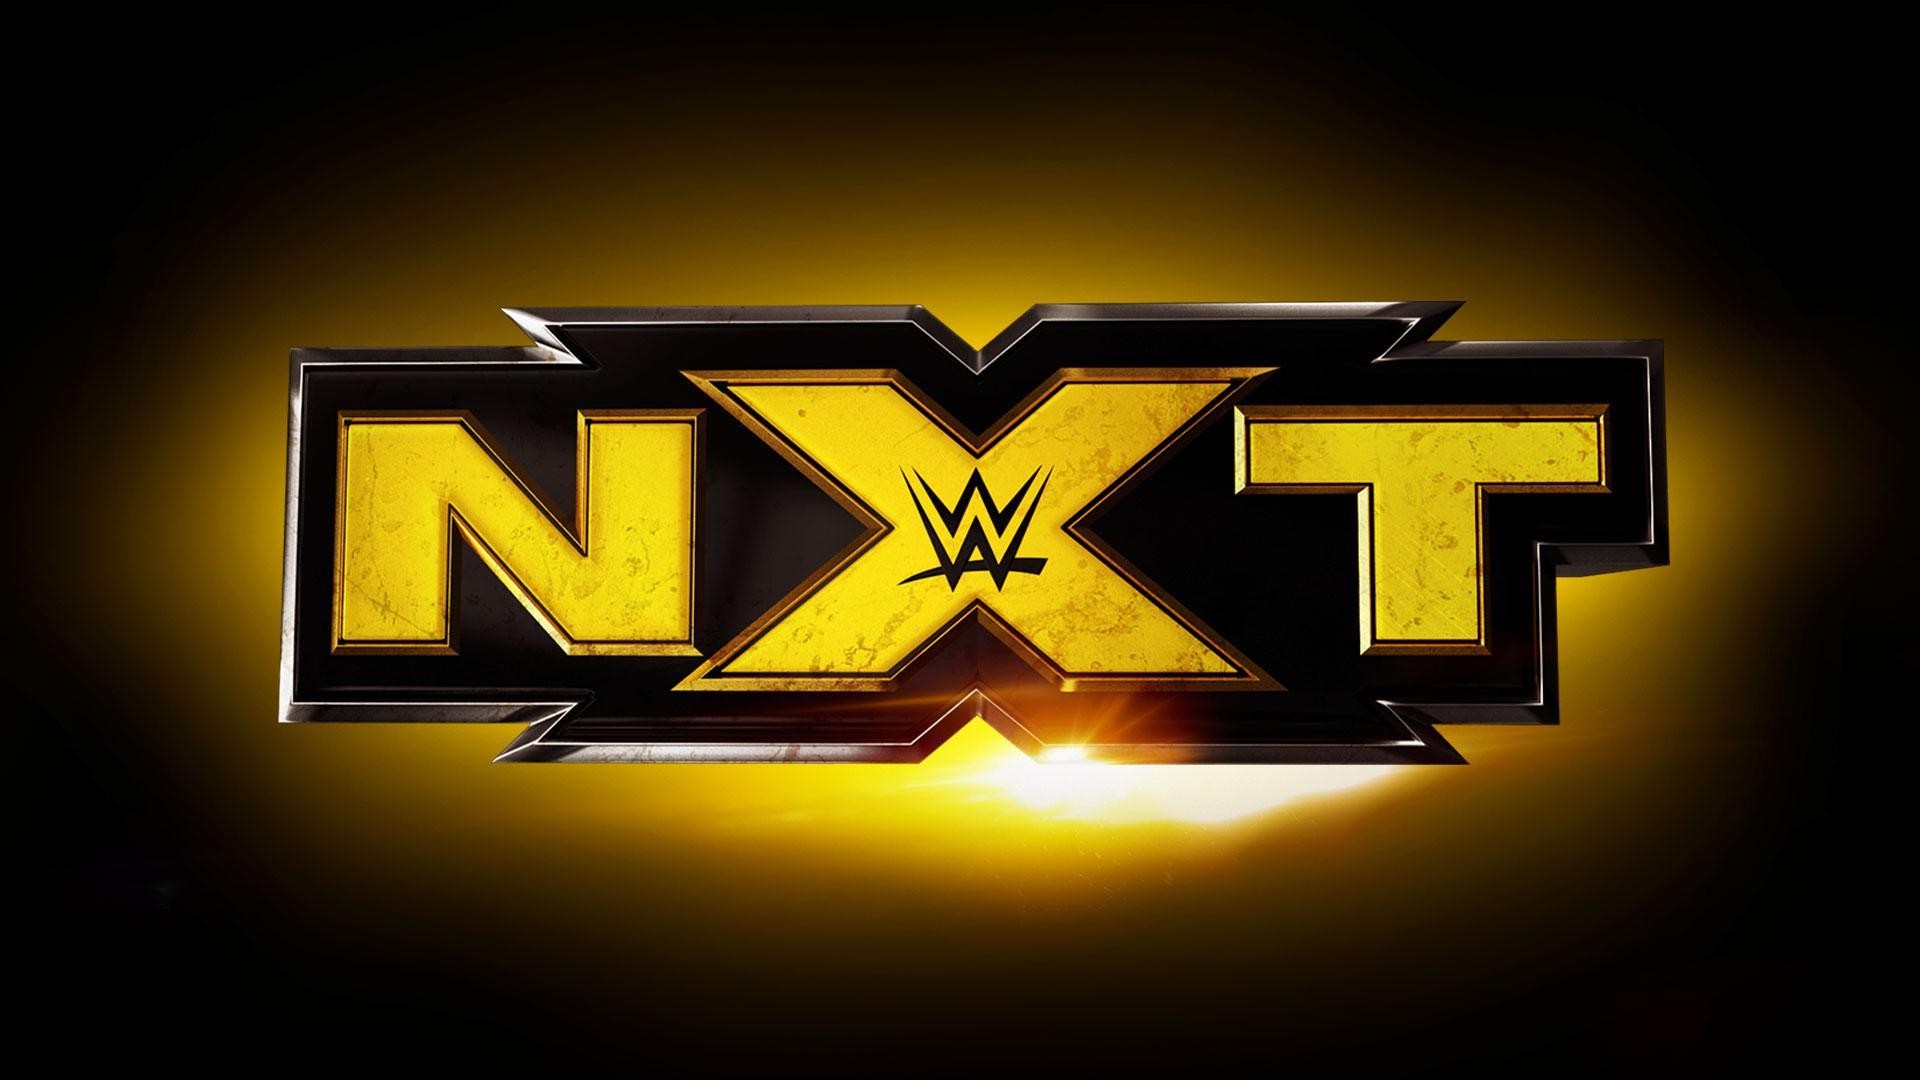 Wallpaper NXT WWE HD with high-resolution 1920x1080 pixel. You can use this wallpaper for your Desktop Computer Backgrounds, Mac Wallpapers, Android Lock screen or iPhone Screensavers and another smartphone device